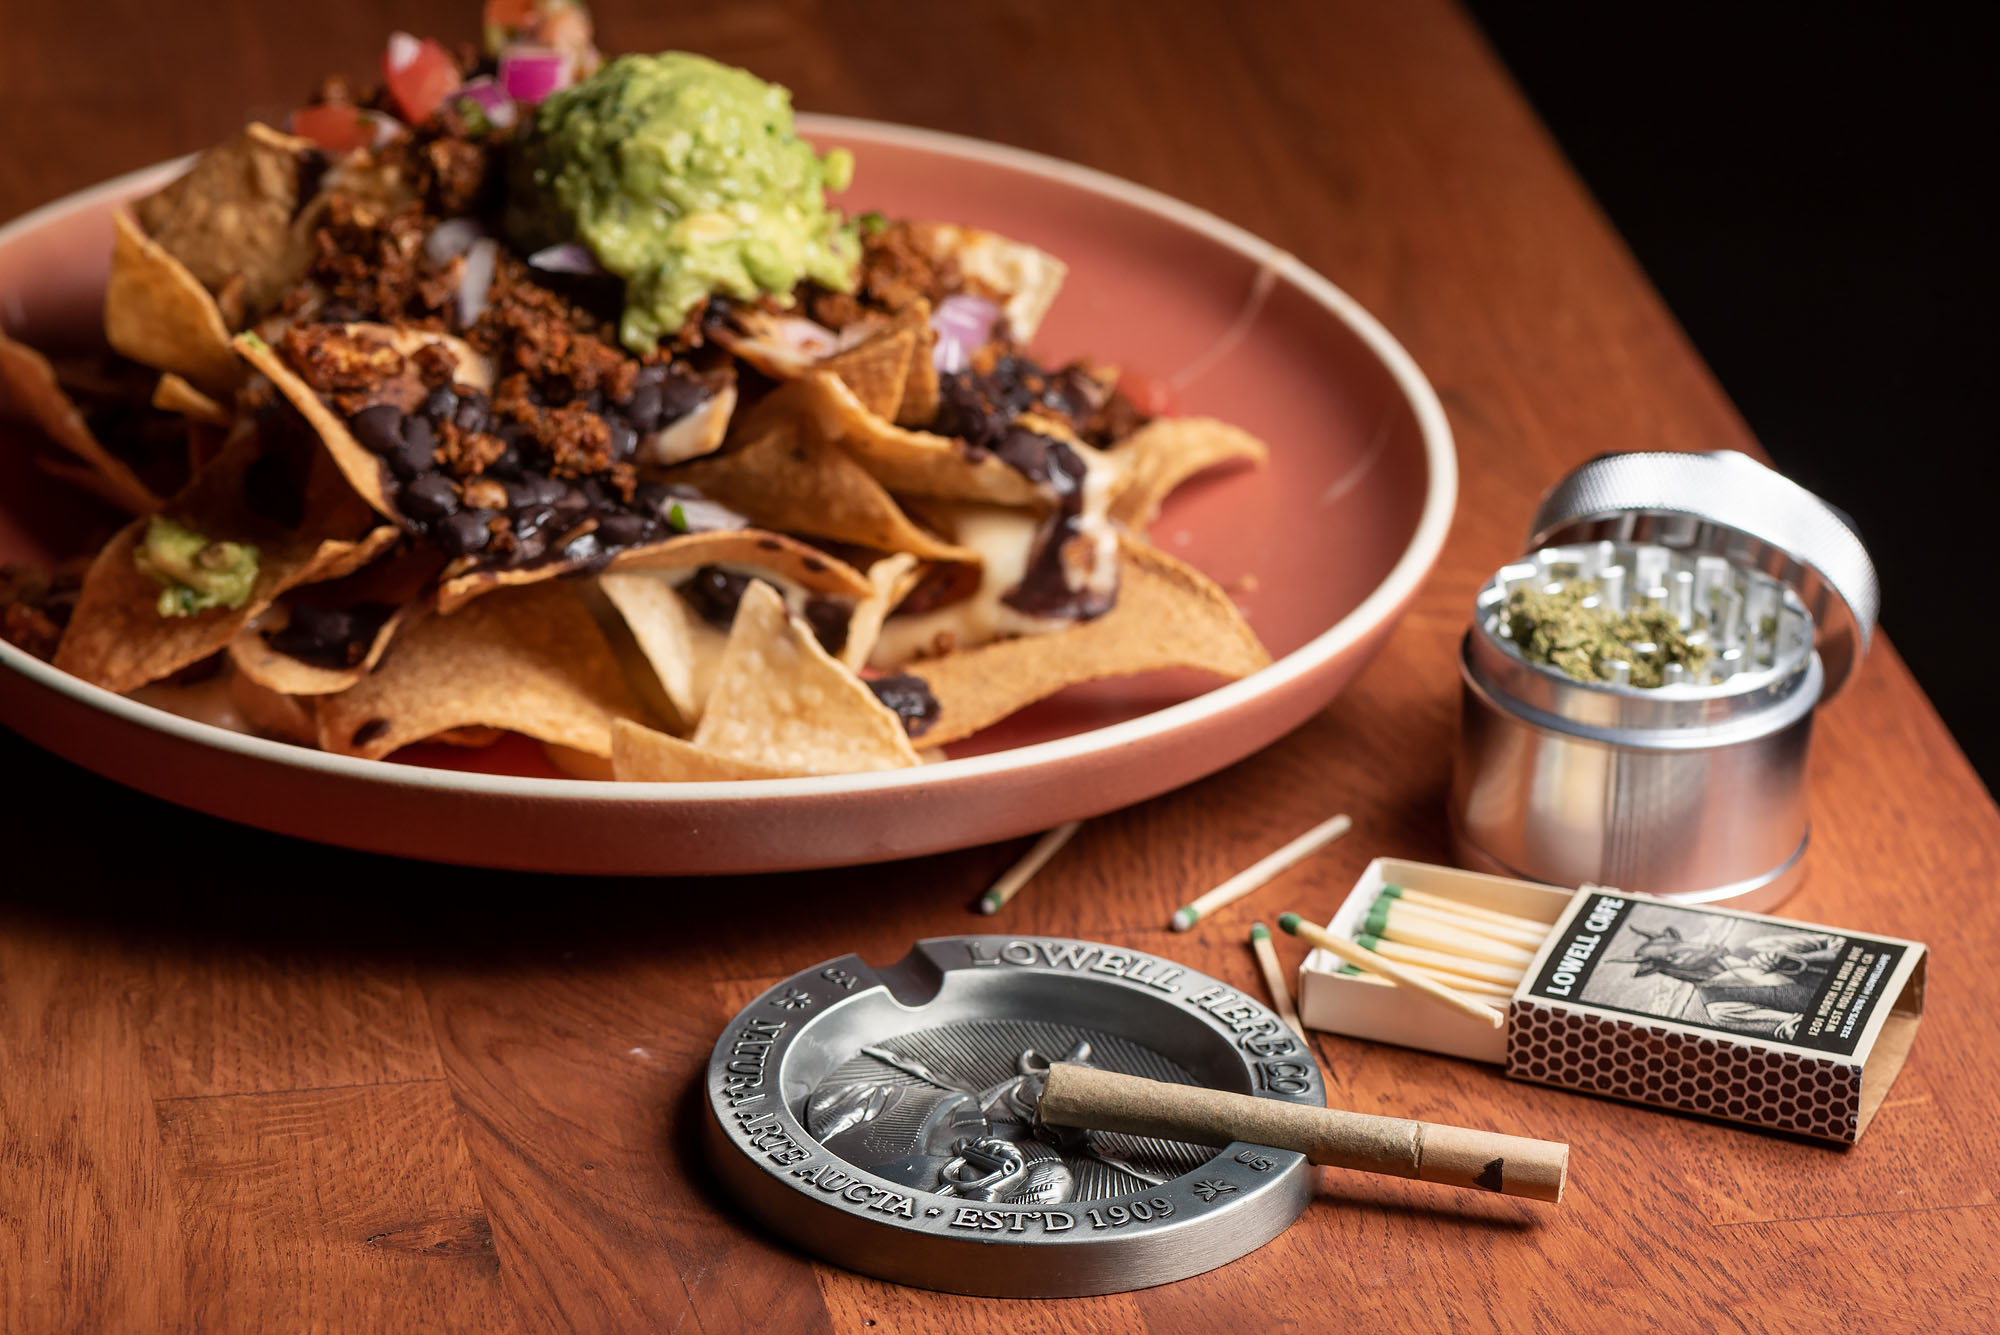 Vegan nachos and cannabis products from the Cannabis Cafe